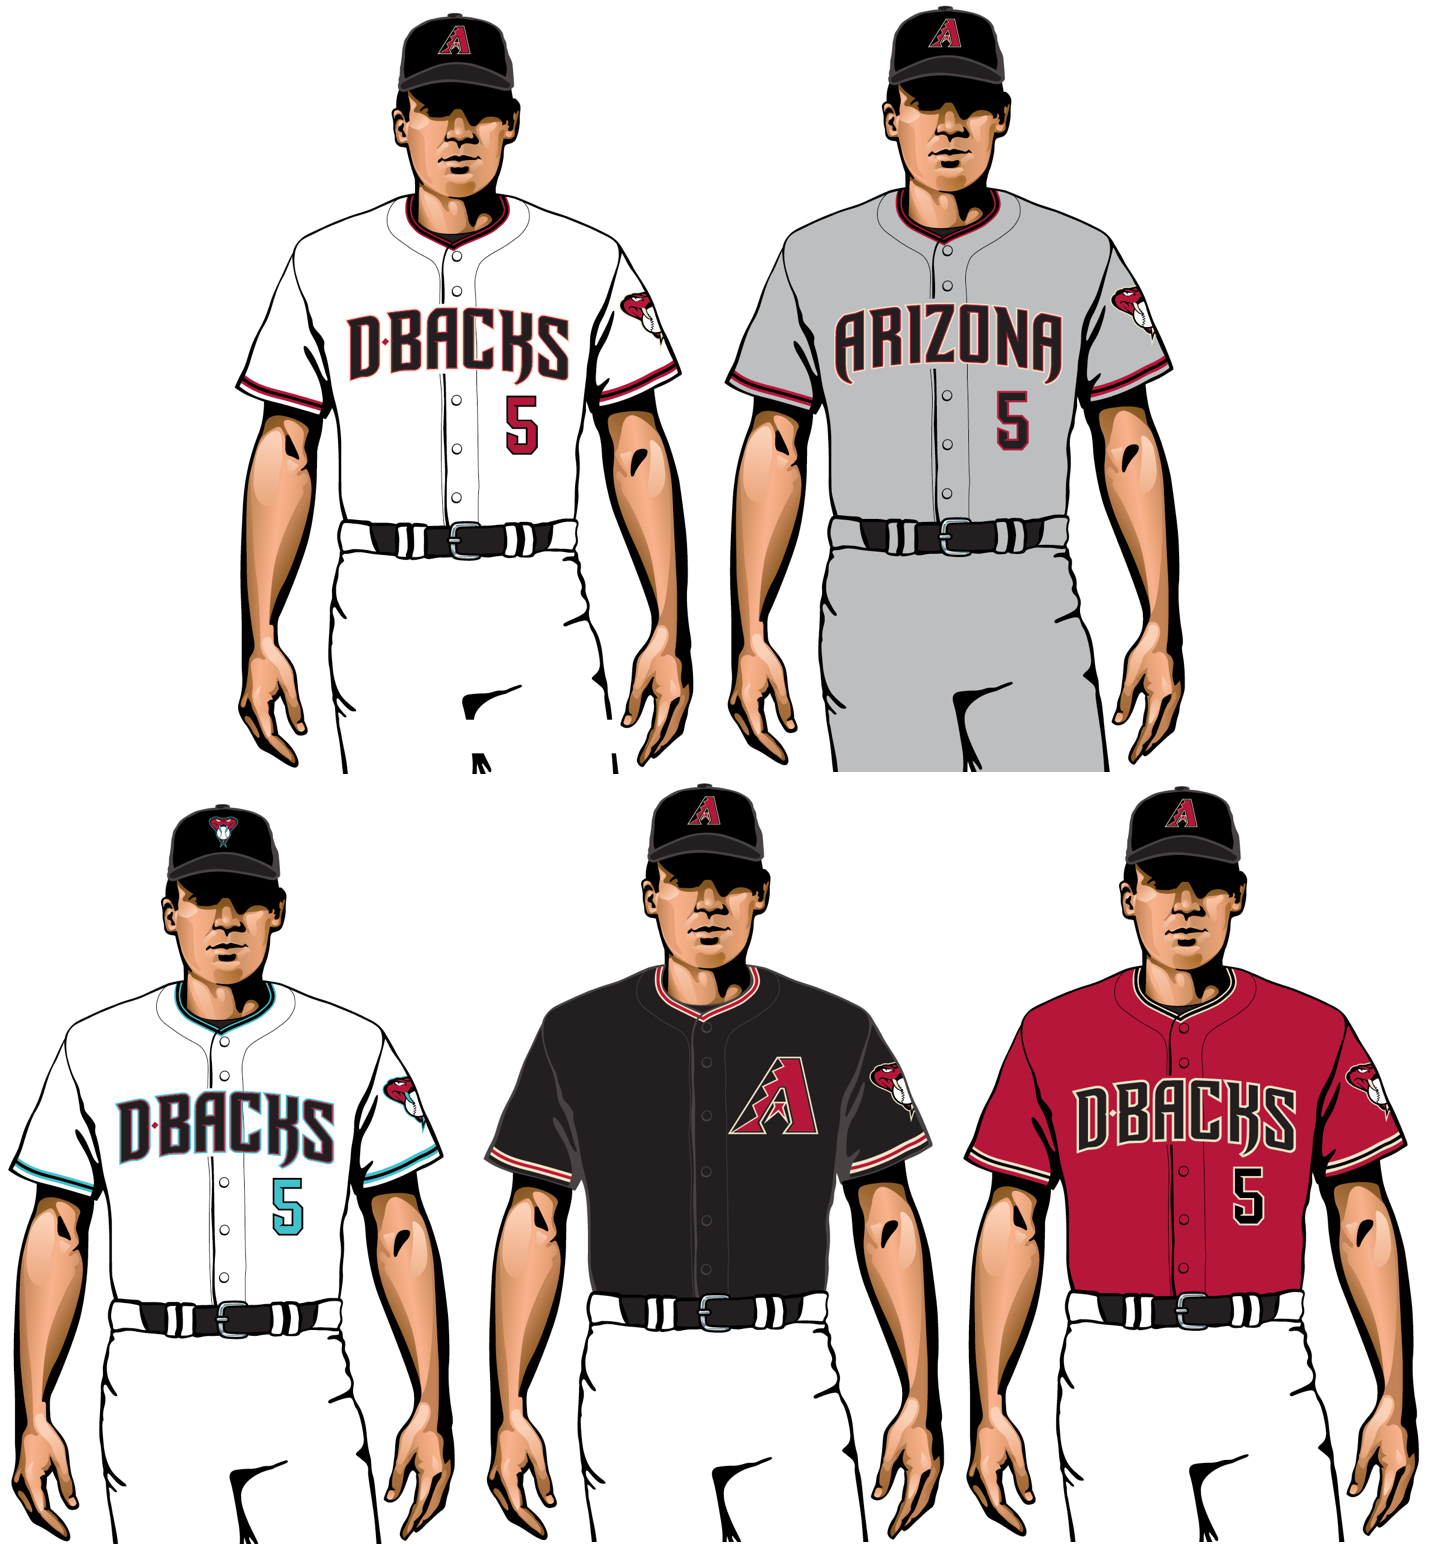 Baseball: Ranking all 30 MLB uniforms from best to worst - Page 2